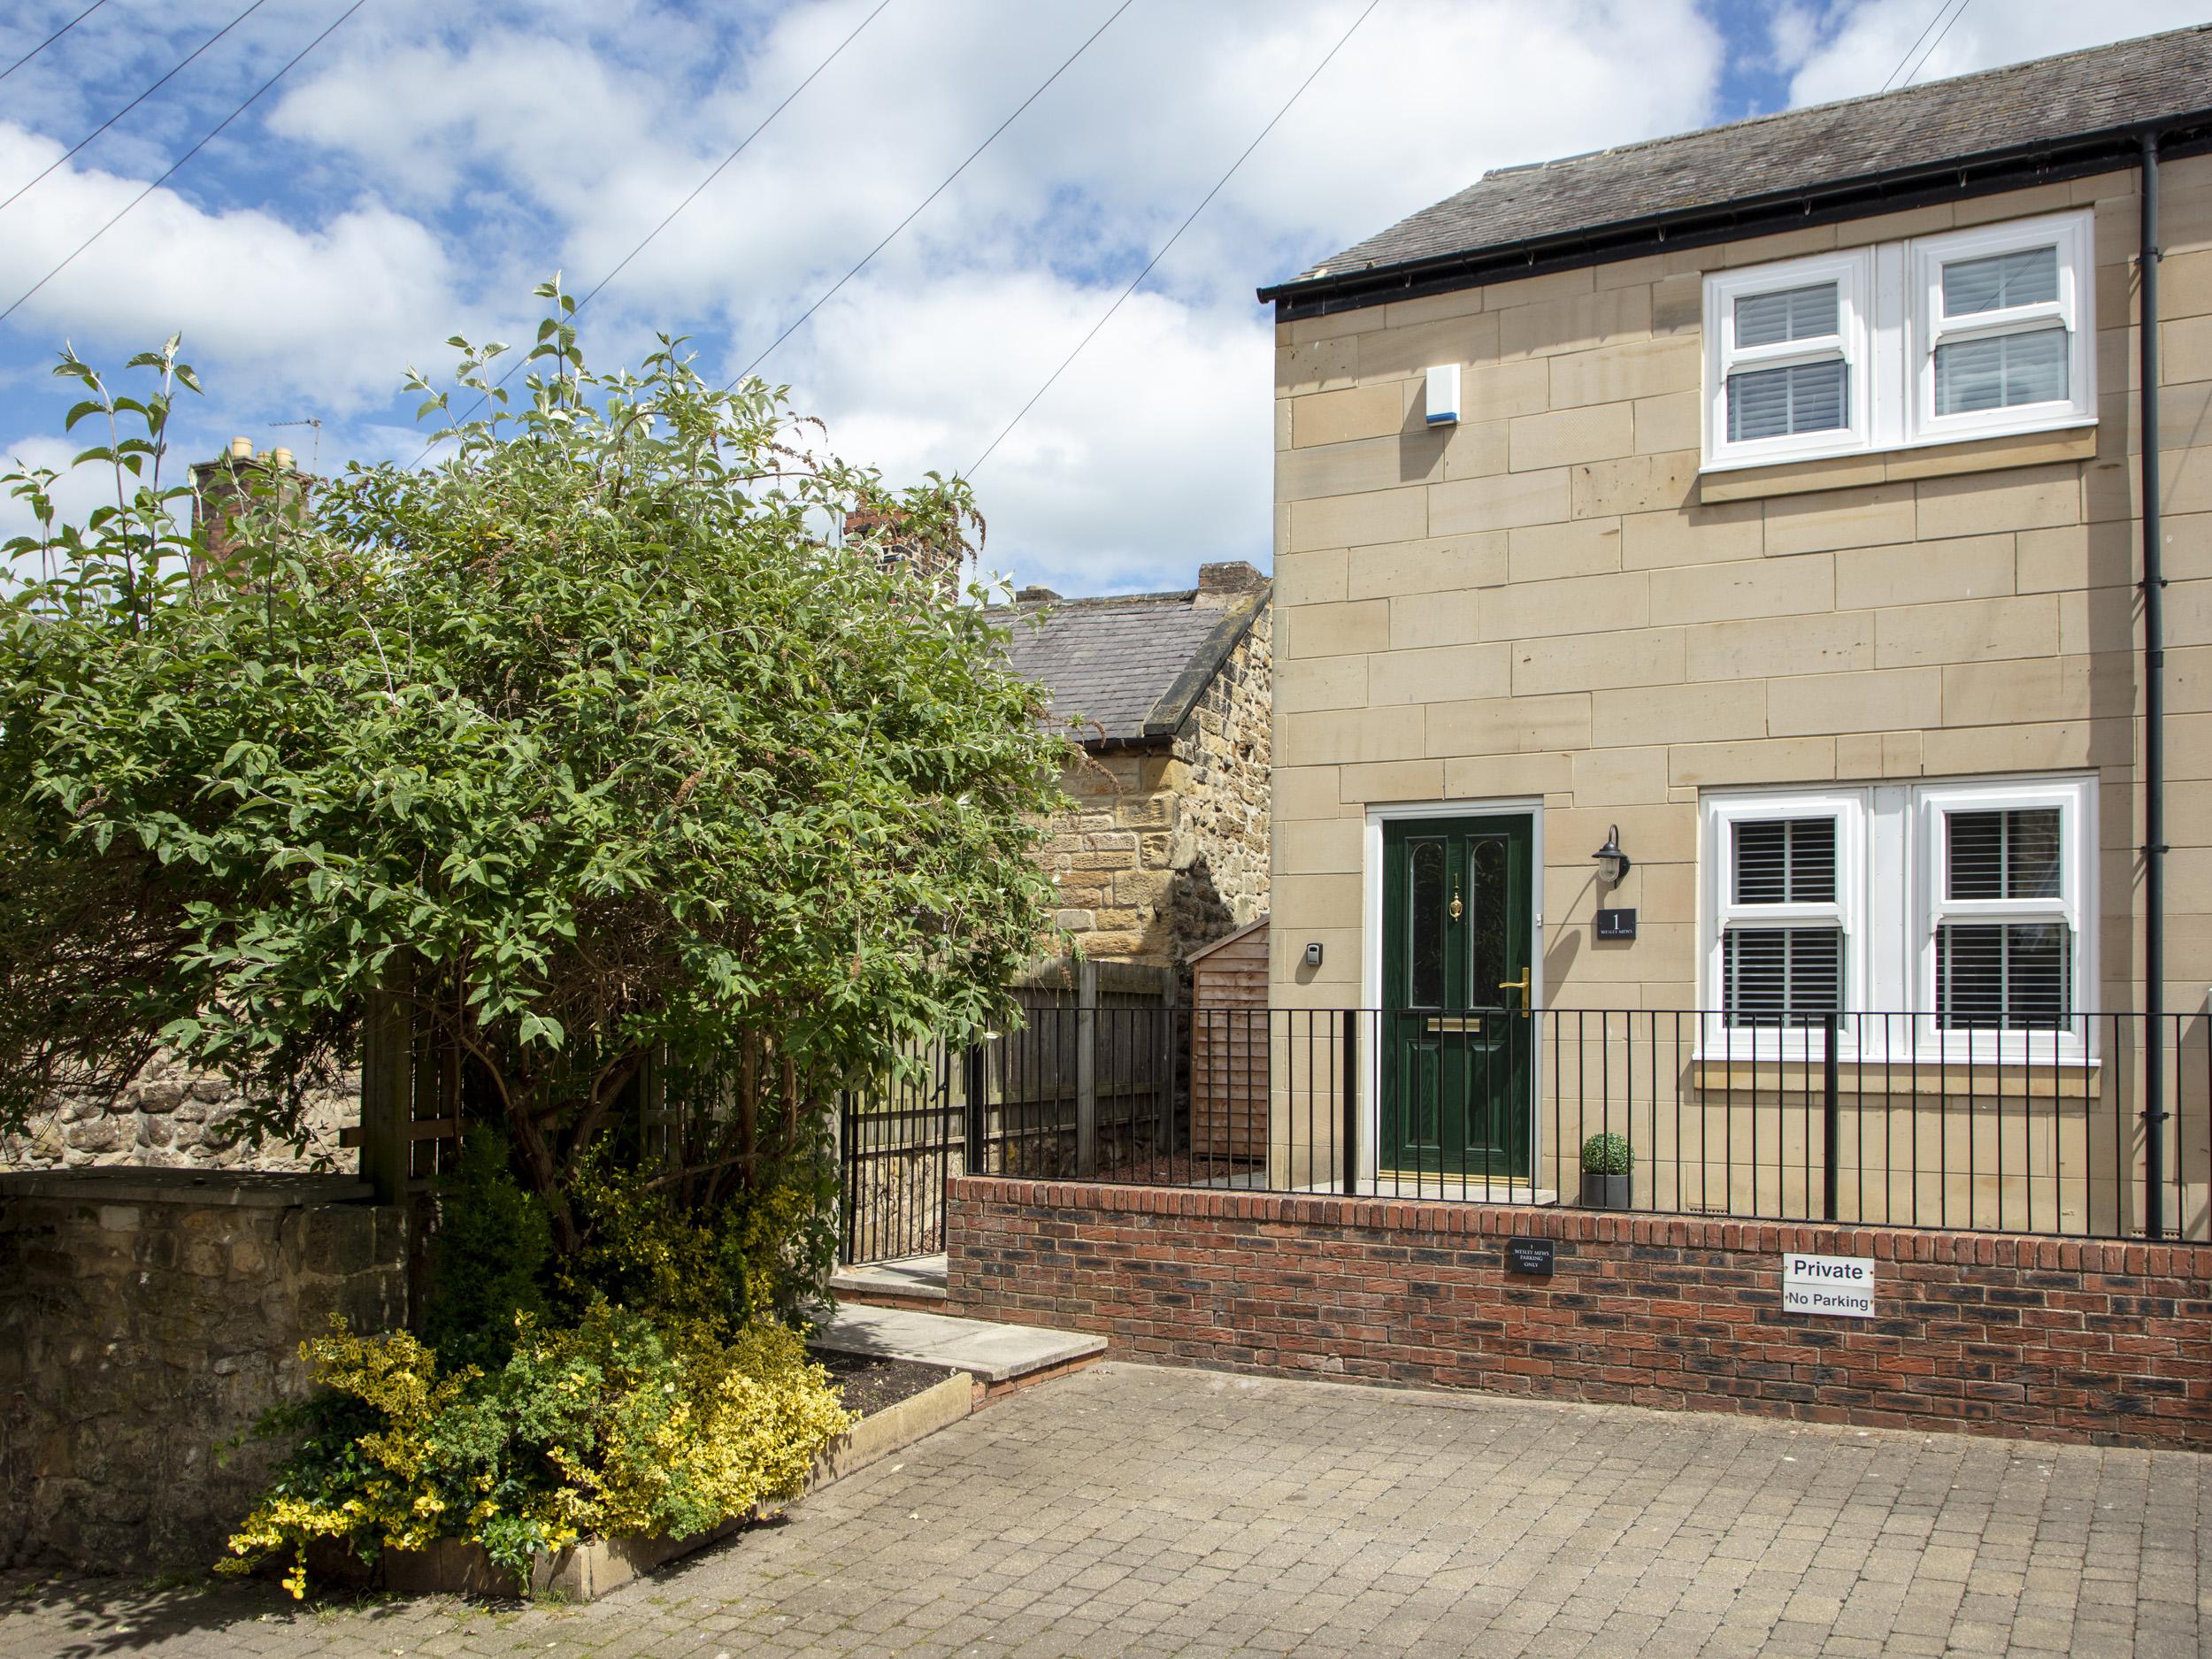 Holiday Cottage Reviews for 1 Wesley Mews - Self Catering Property in Alnwick, Northumberland